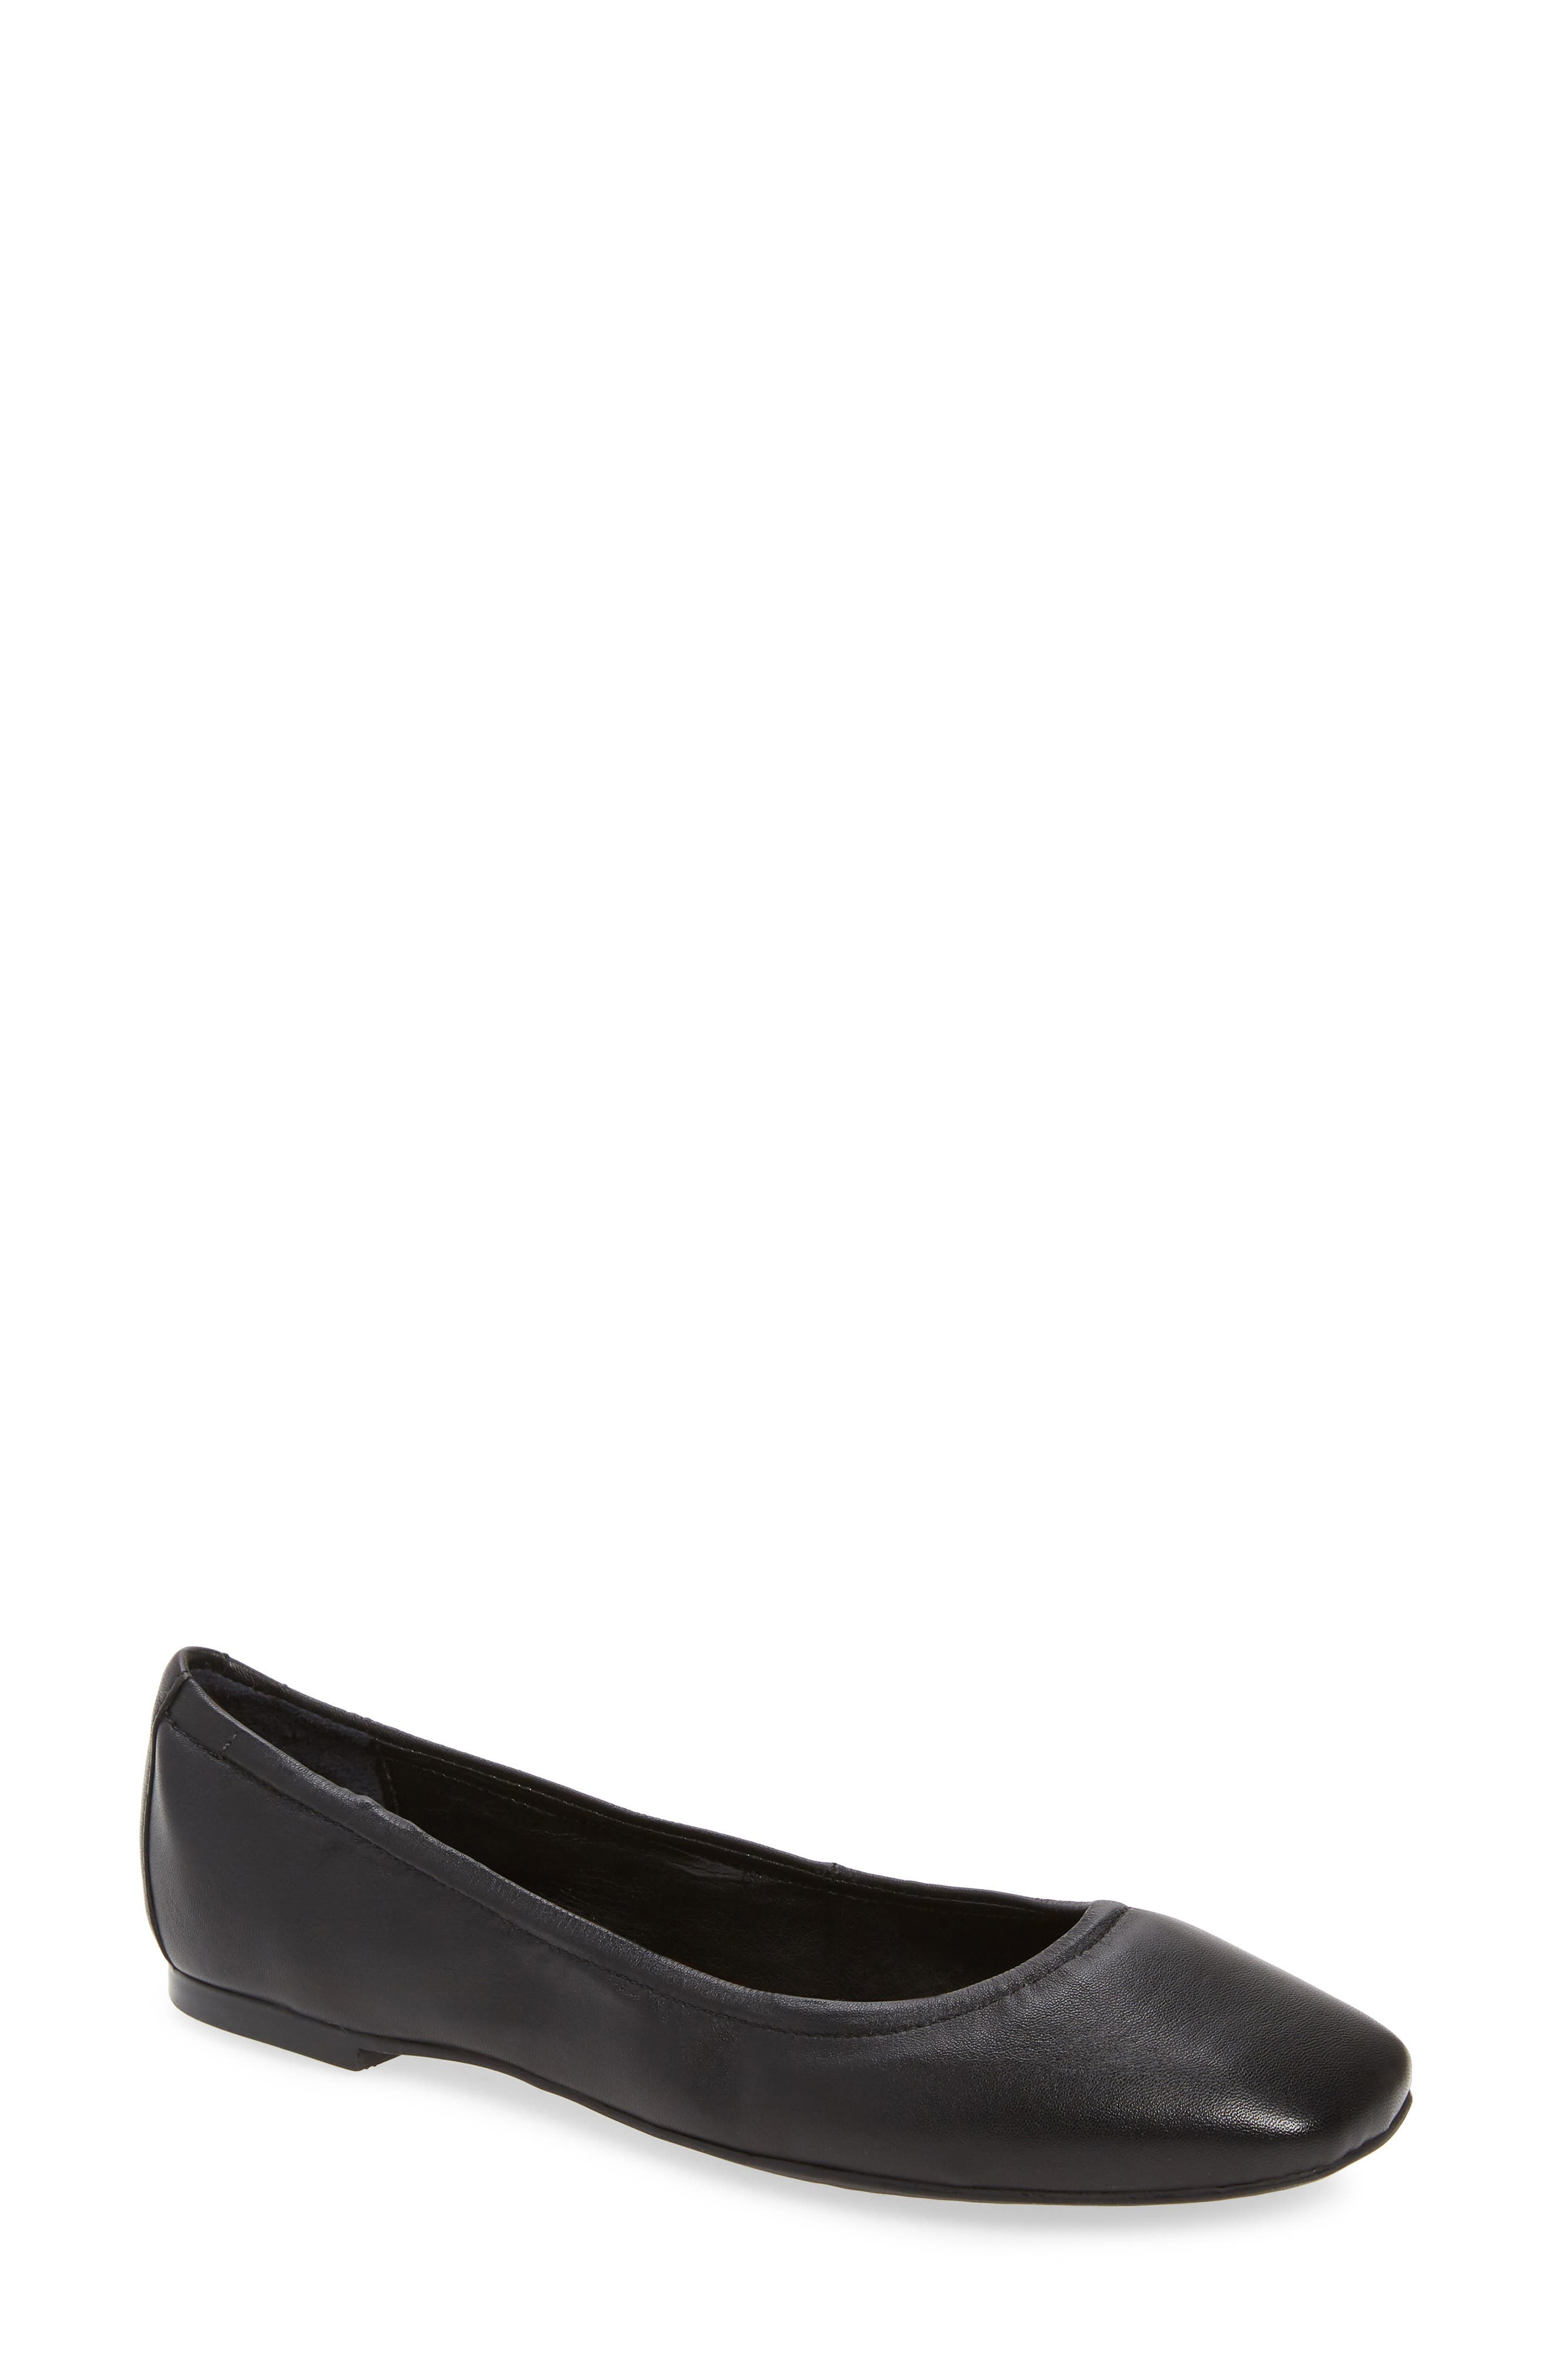 vince camuto leather flats